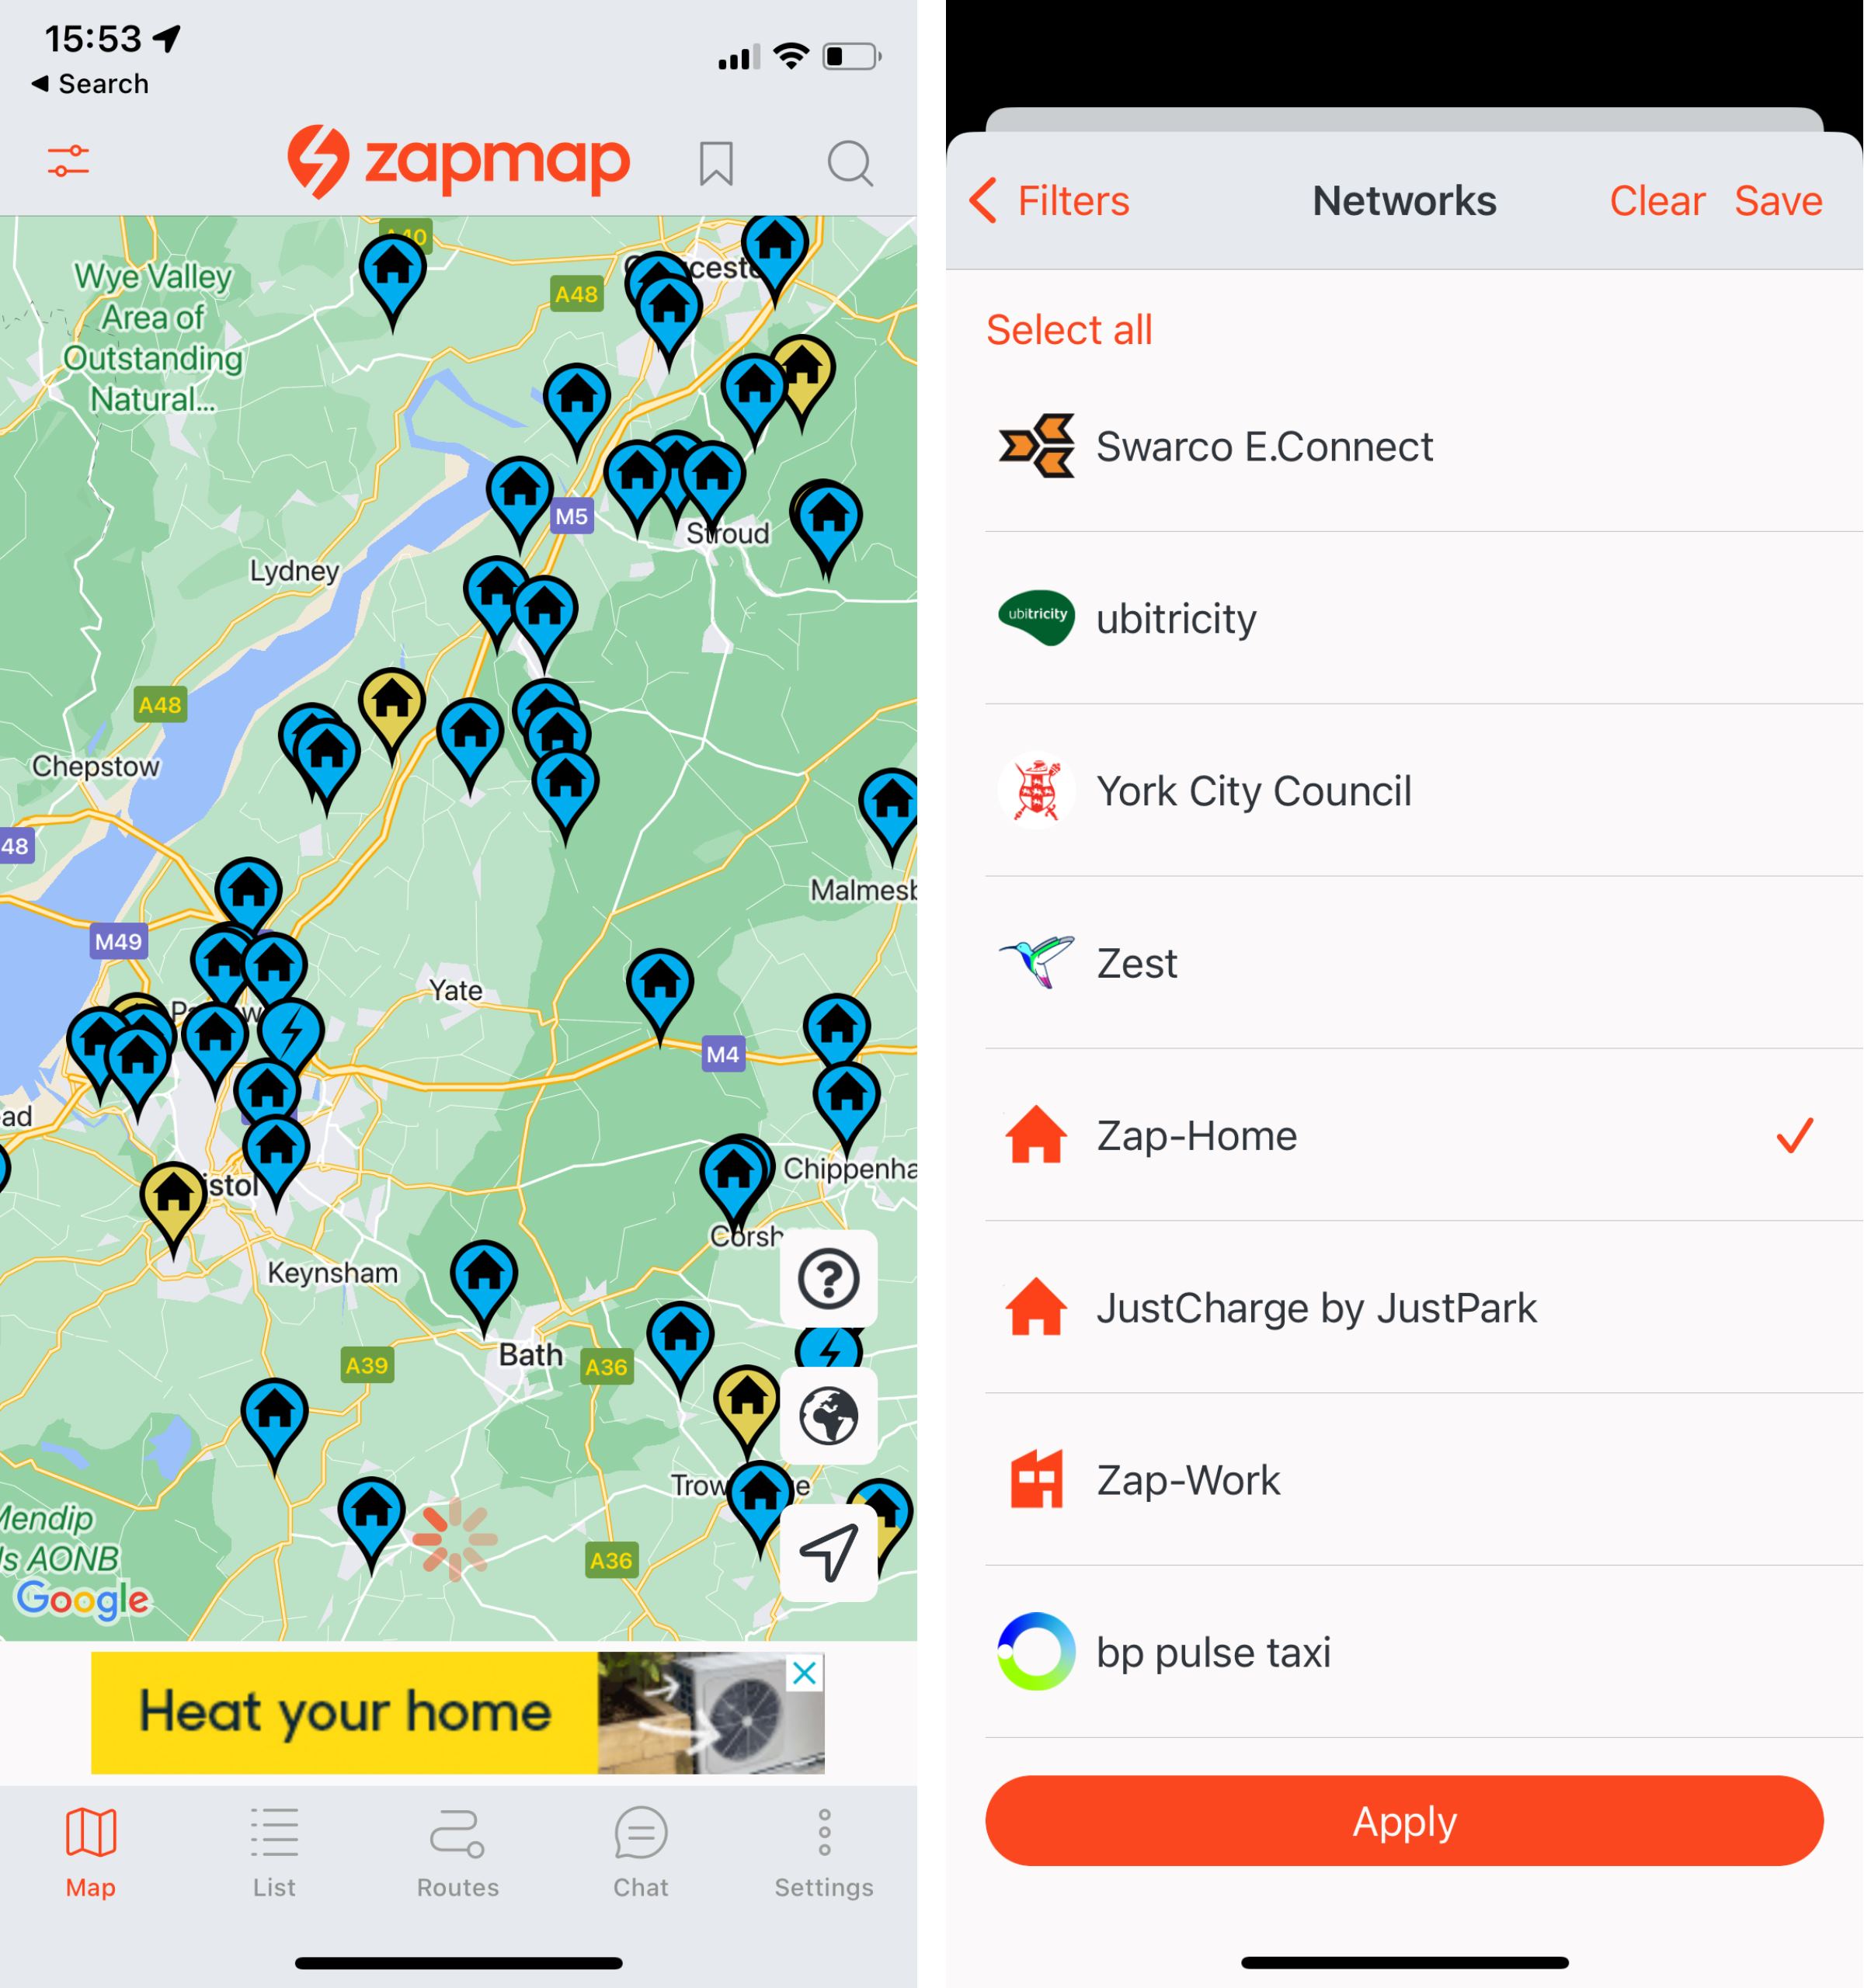 Screengrabs of the Network filter screen and Zap-Home points on the Zapmap app